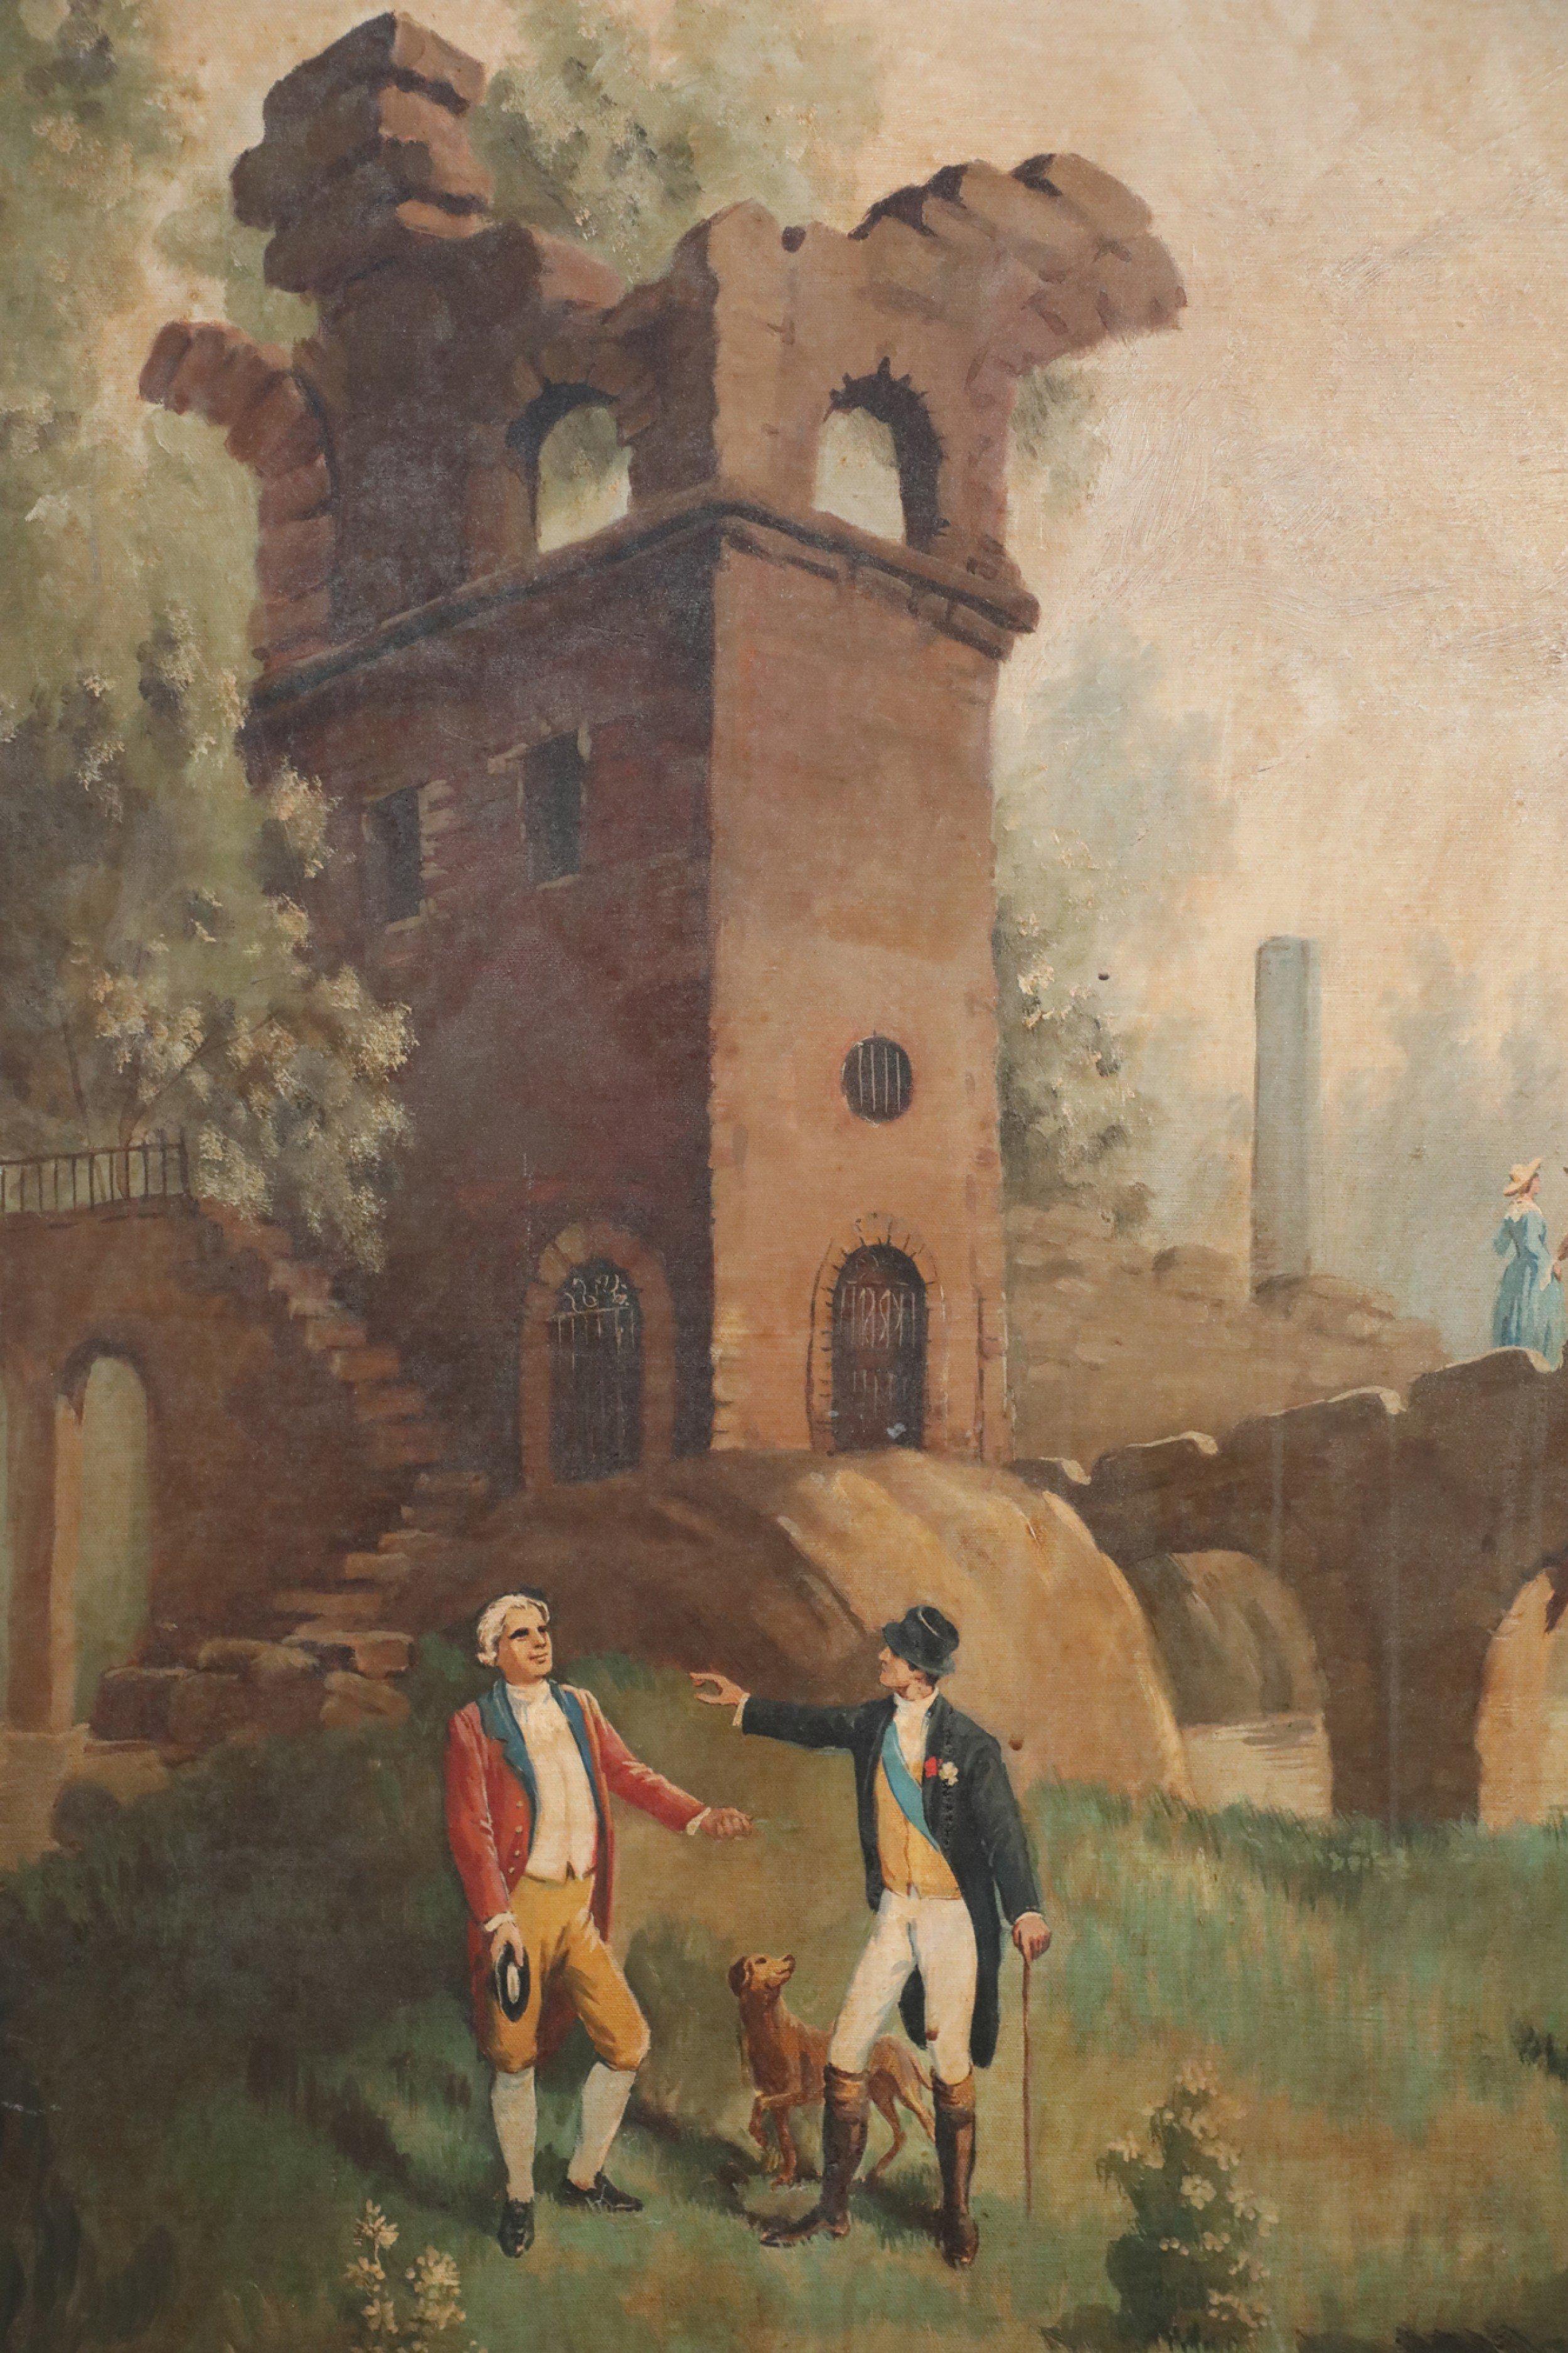 Vintage (20th Century) genre painting capturing figures working in a garden, where two noblemen are also conversing, at the foot of ruins and a stone bridge, while a windmill and buildings are seen in the distance. Painted in muted tones on